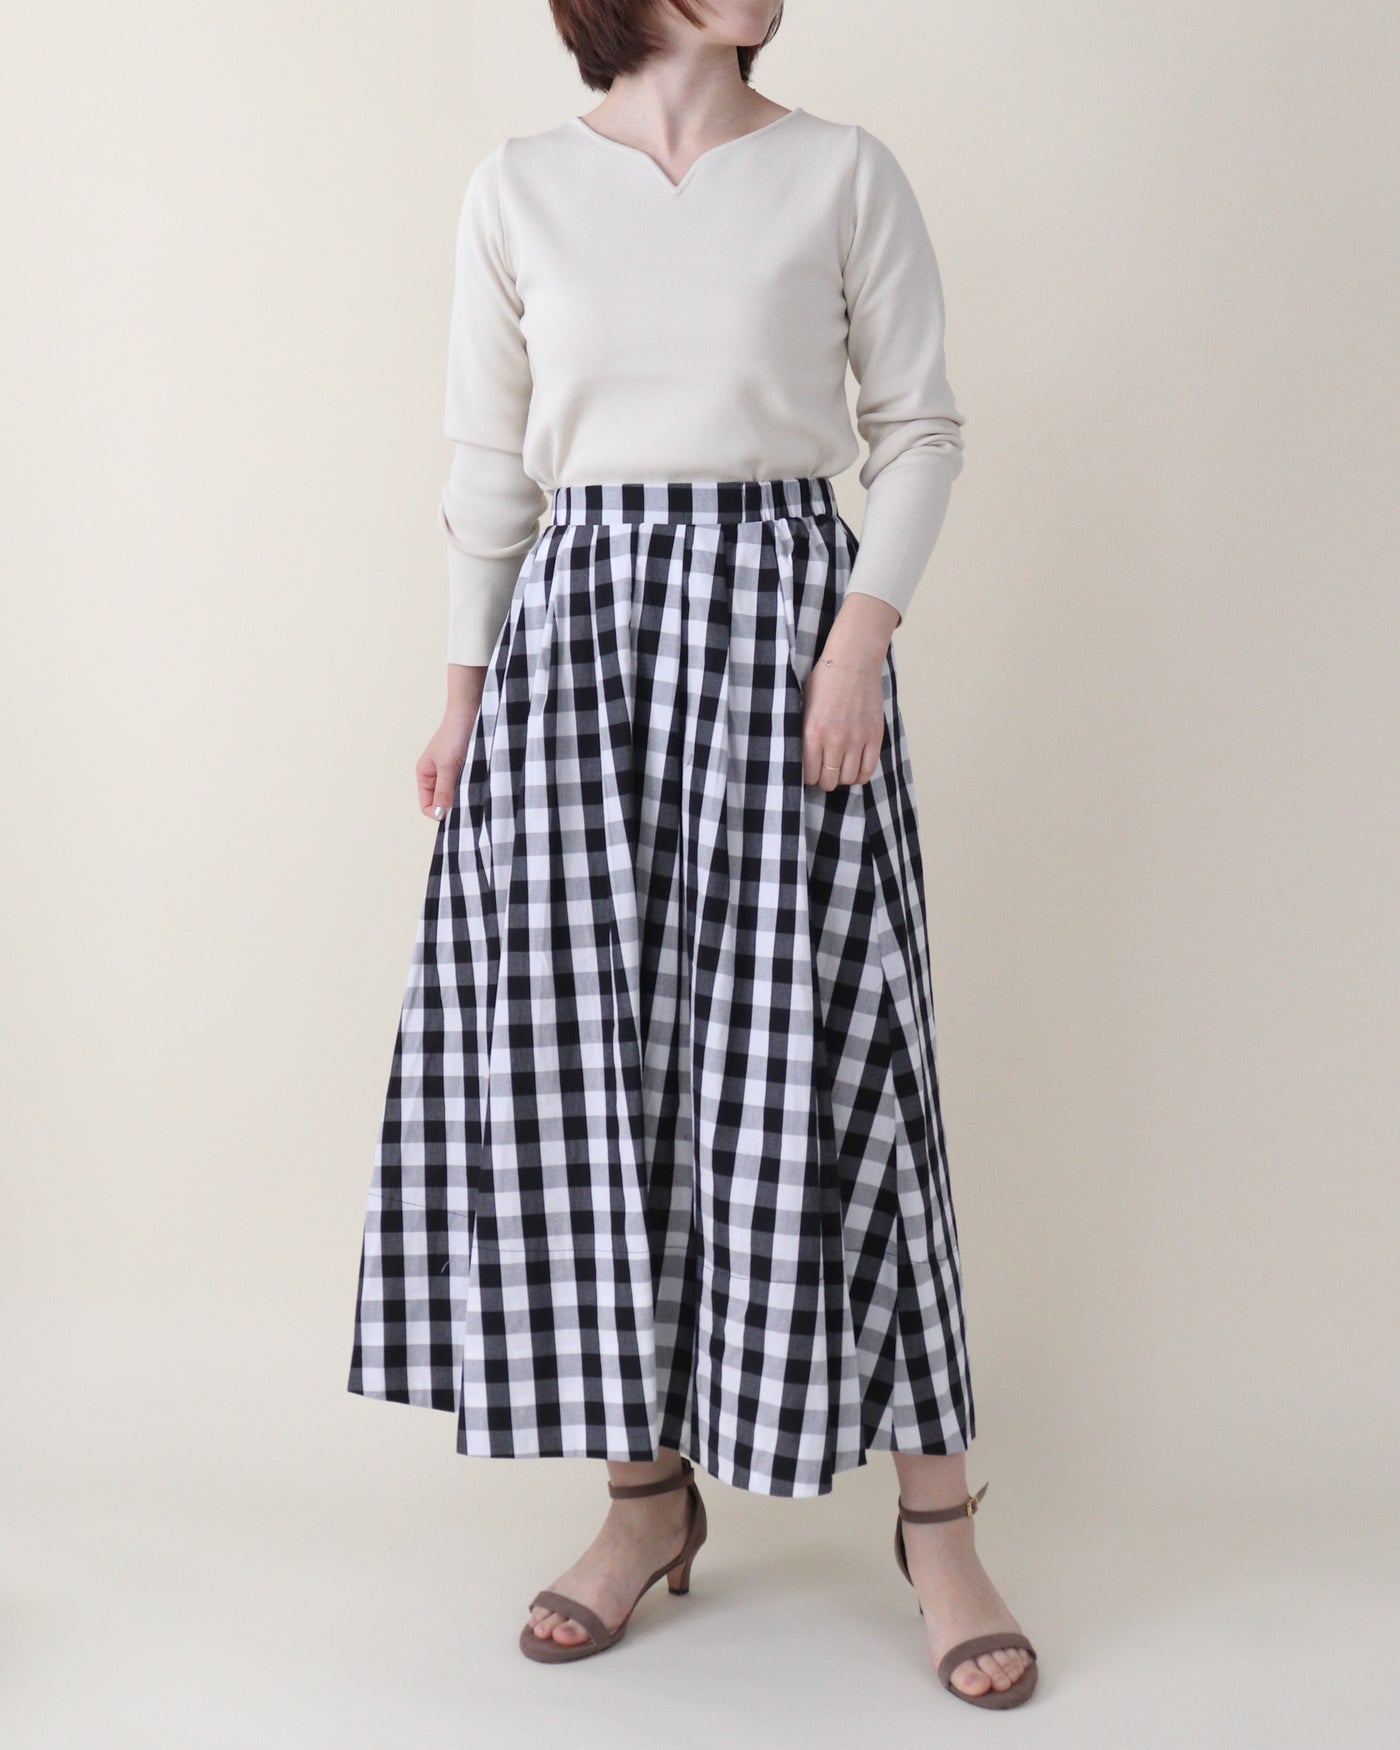 GINGHAM 身長159㎝ 着用サイズ:FREE